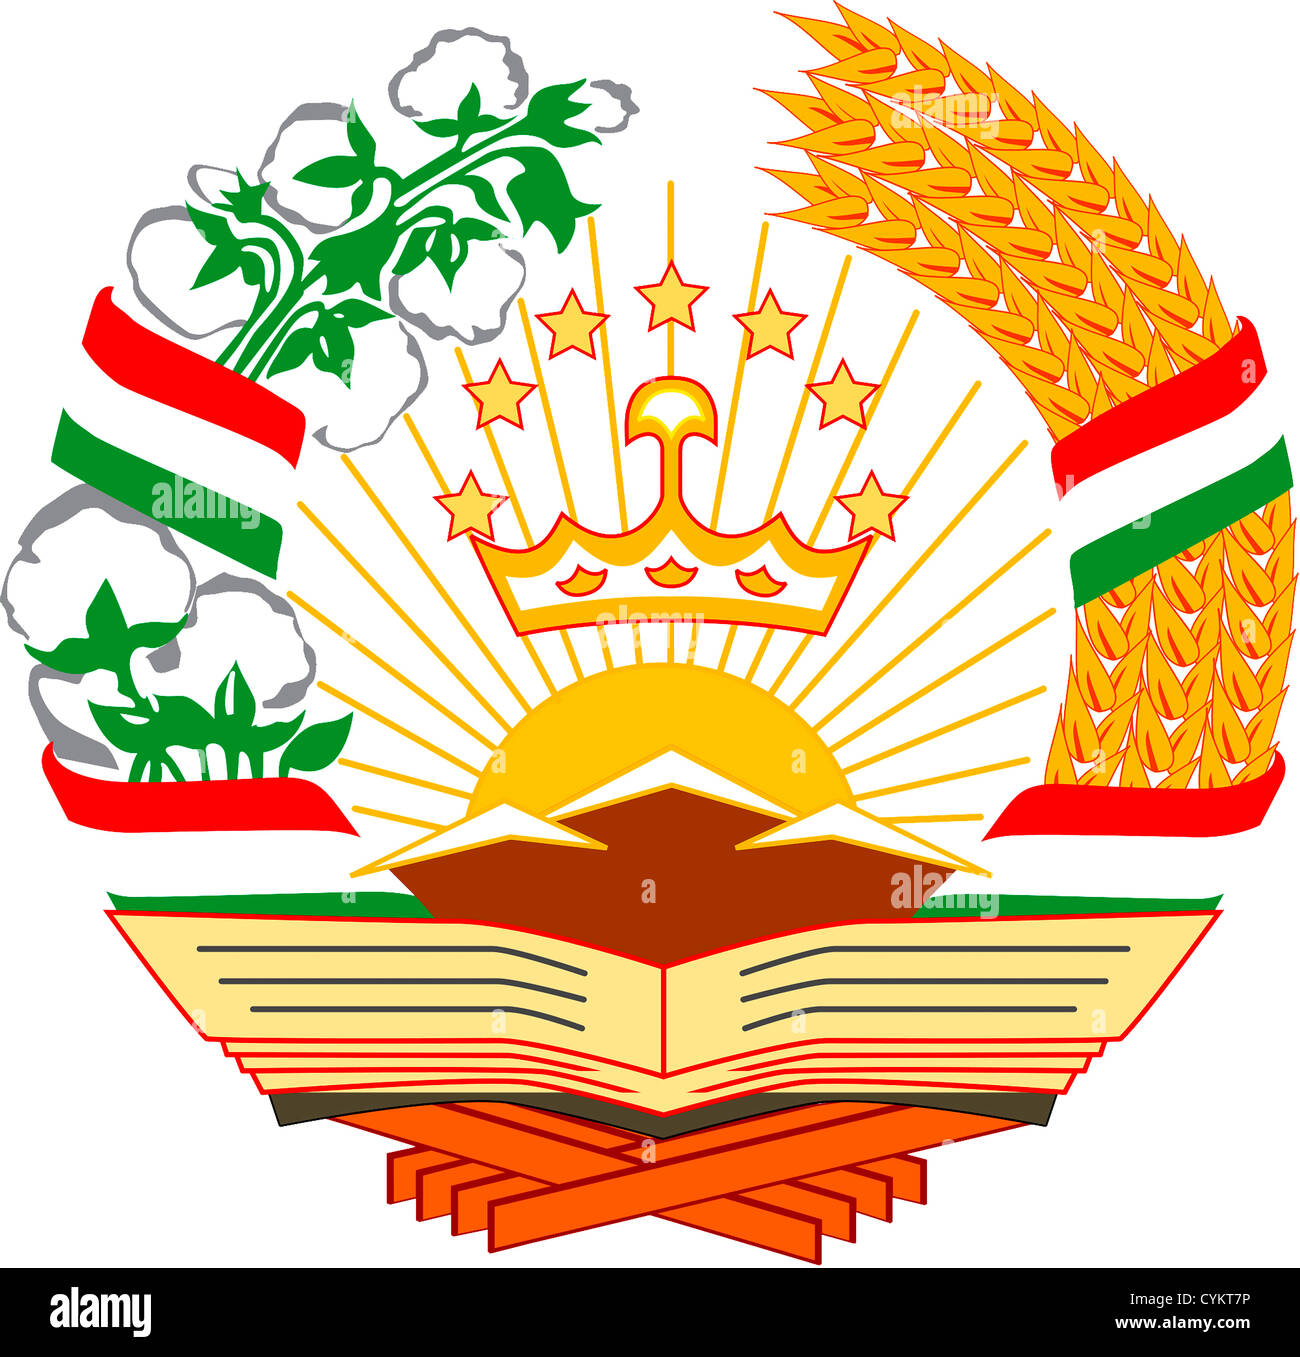 National coat of arms of the Republic of Tajikistan. Stock Photo